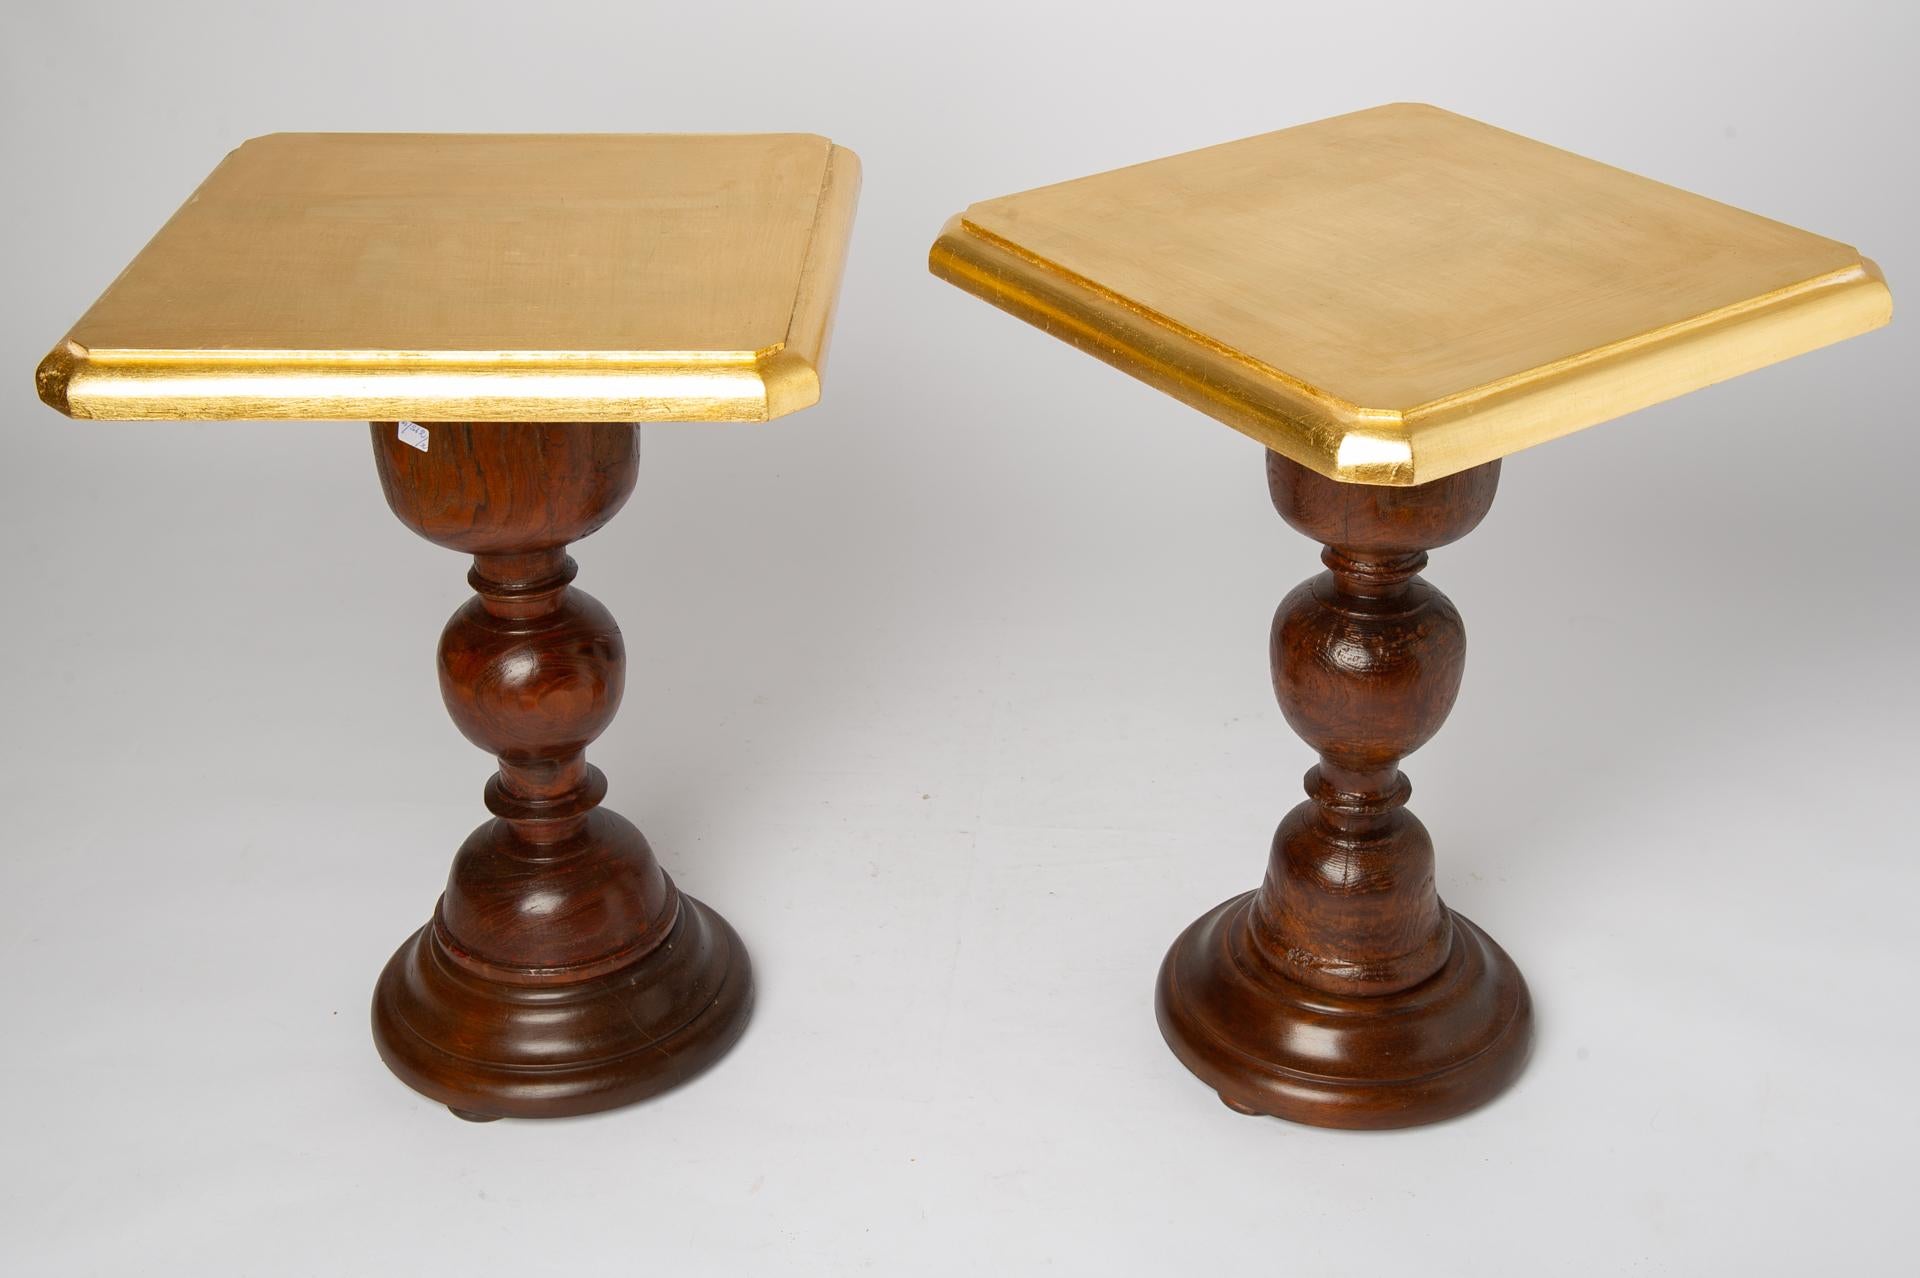 Gilt Pair of Small Tables with Golden Wooden Top For Sale